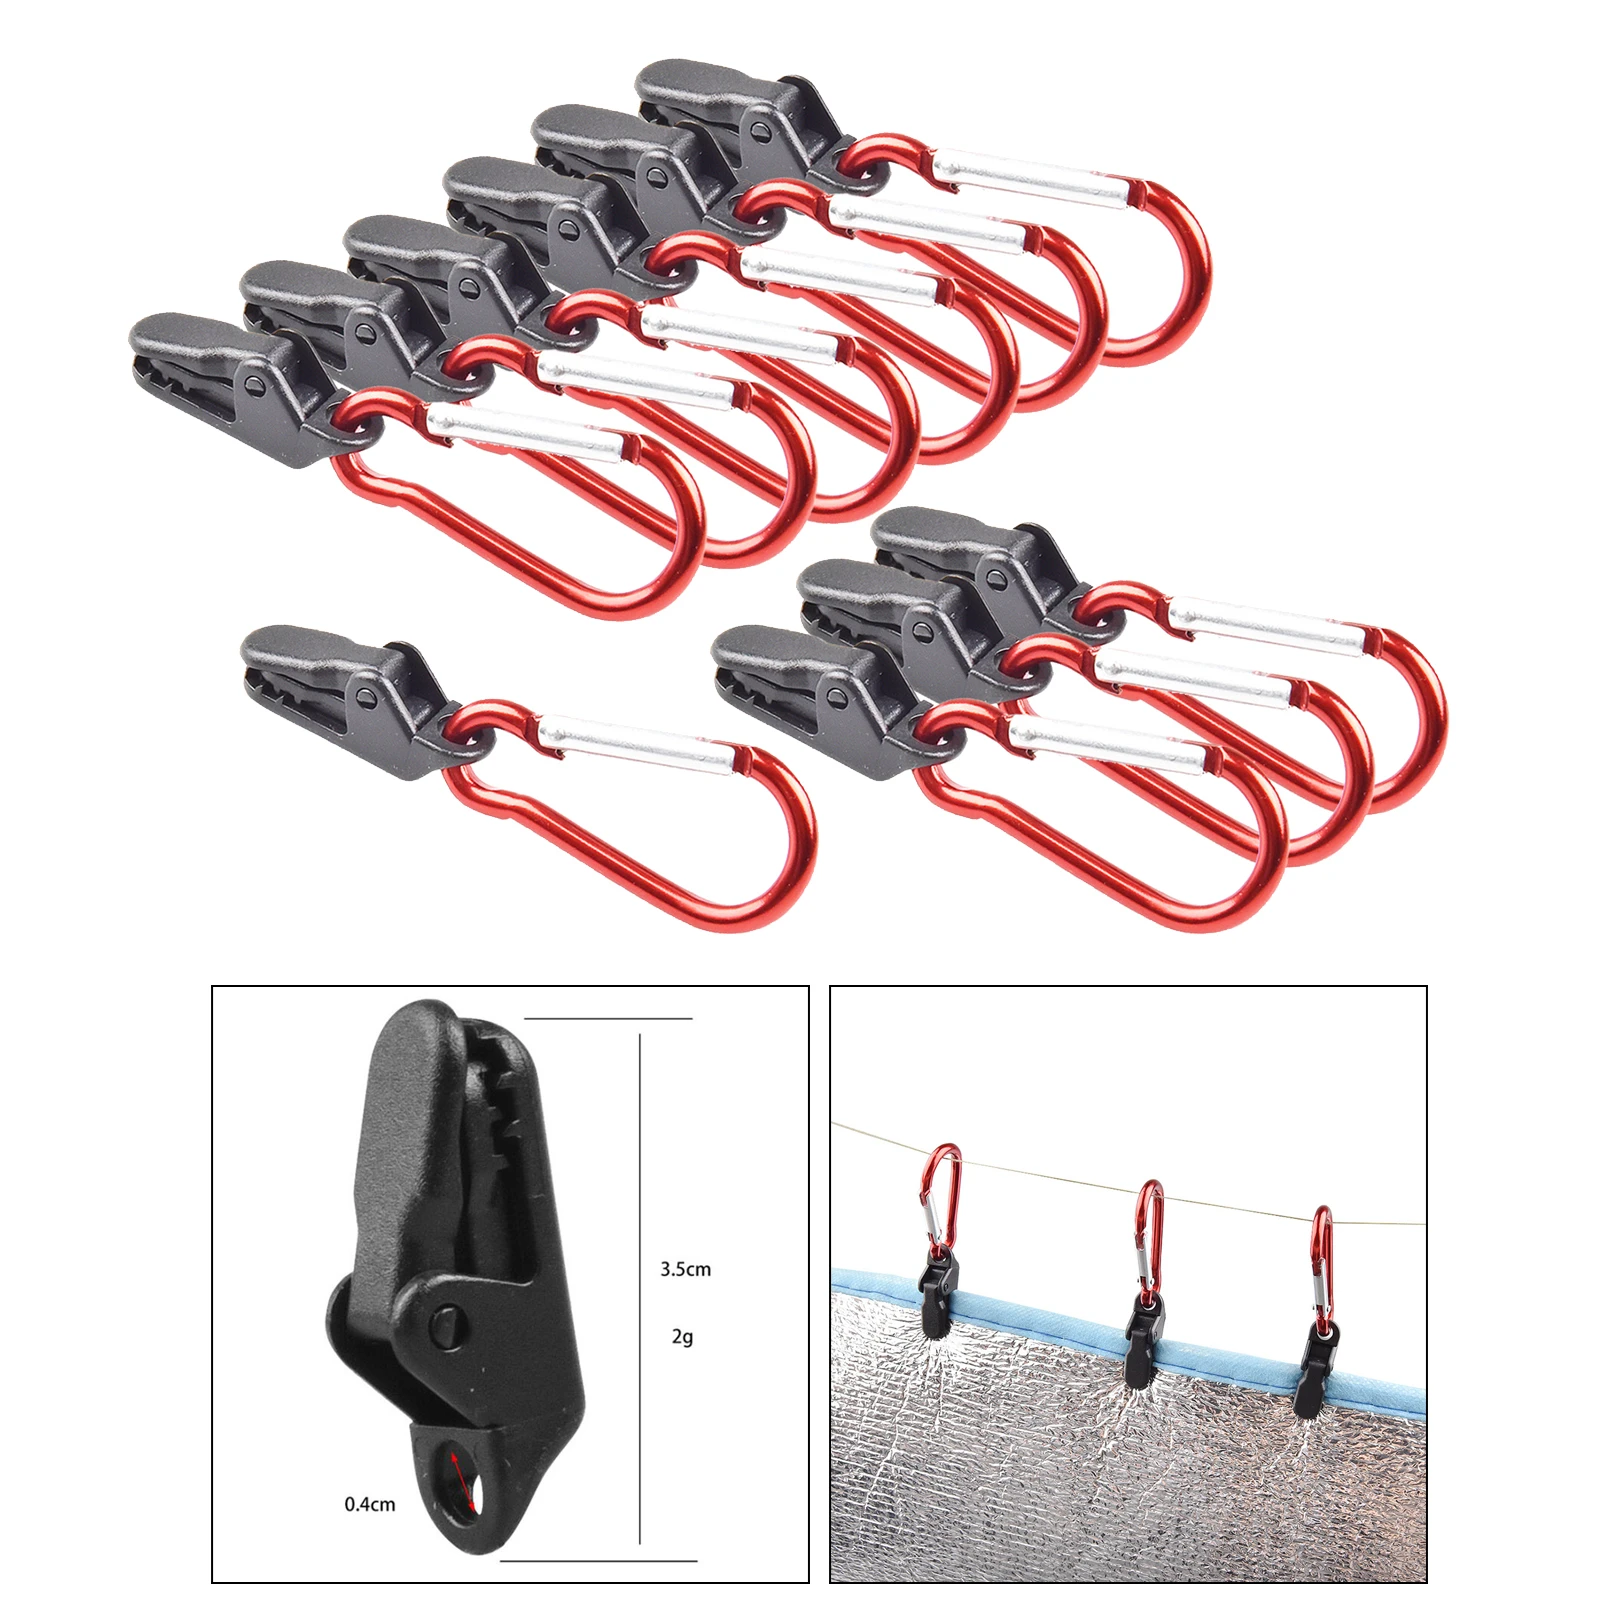 10pcs Heavy Duty Tarp Clips With Thumb Screw Tent Tarpaulin Clamps For  Holding Up Tarp, Canopy Car Cover Pool Cover Lock Grip - Tent Accessories -  AliExpress